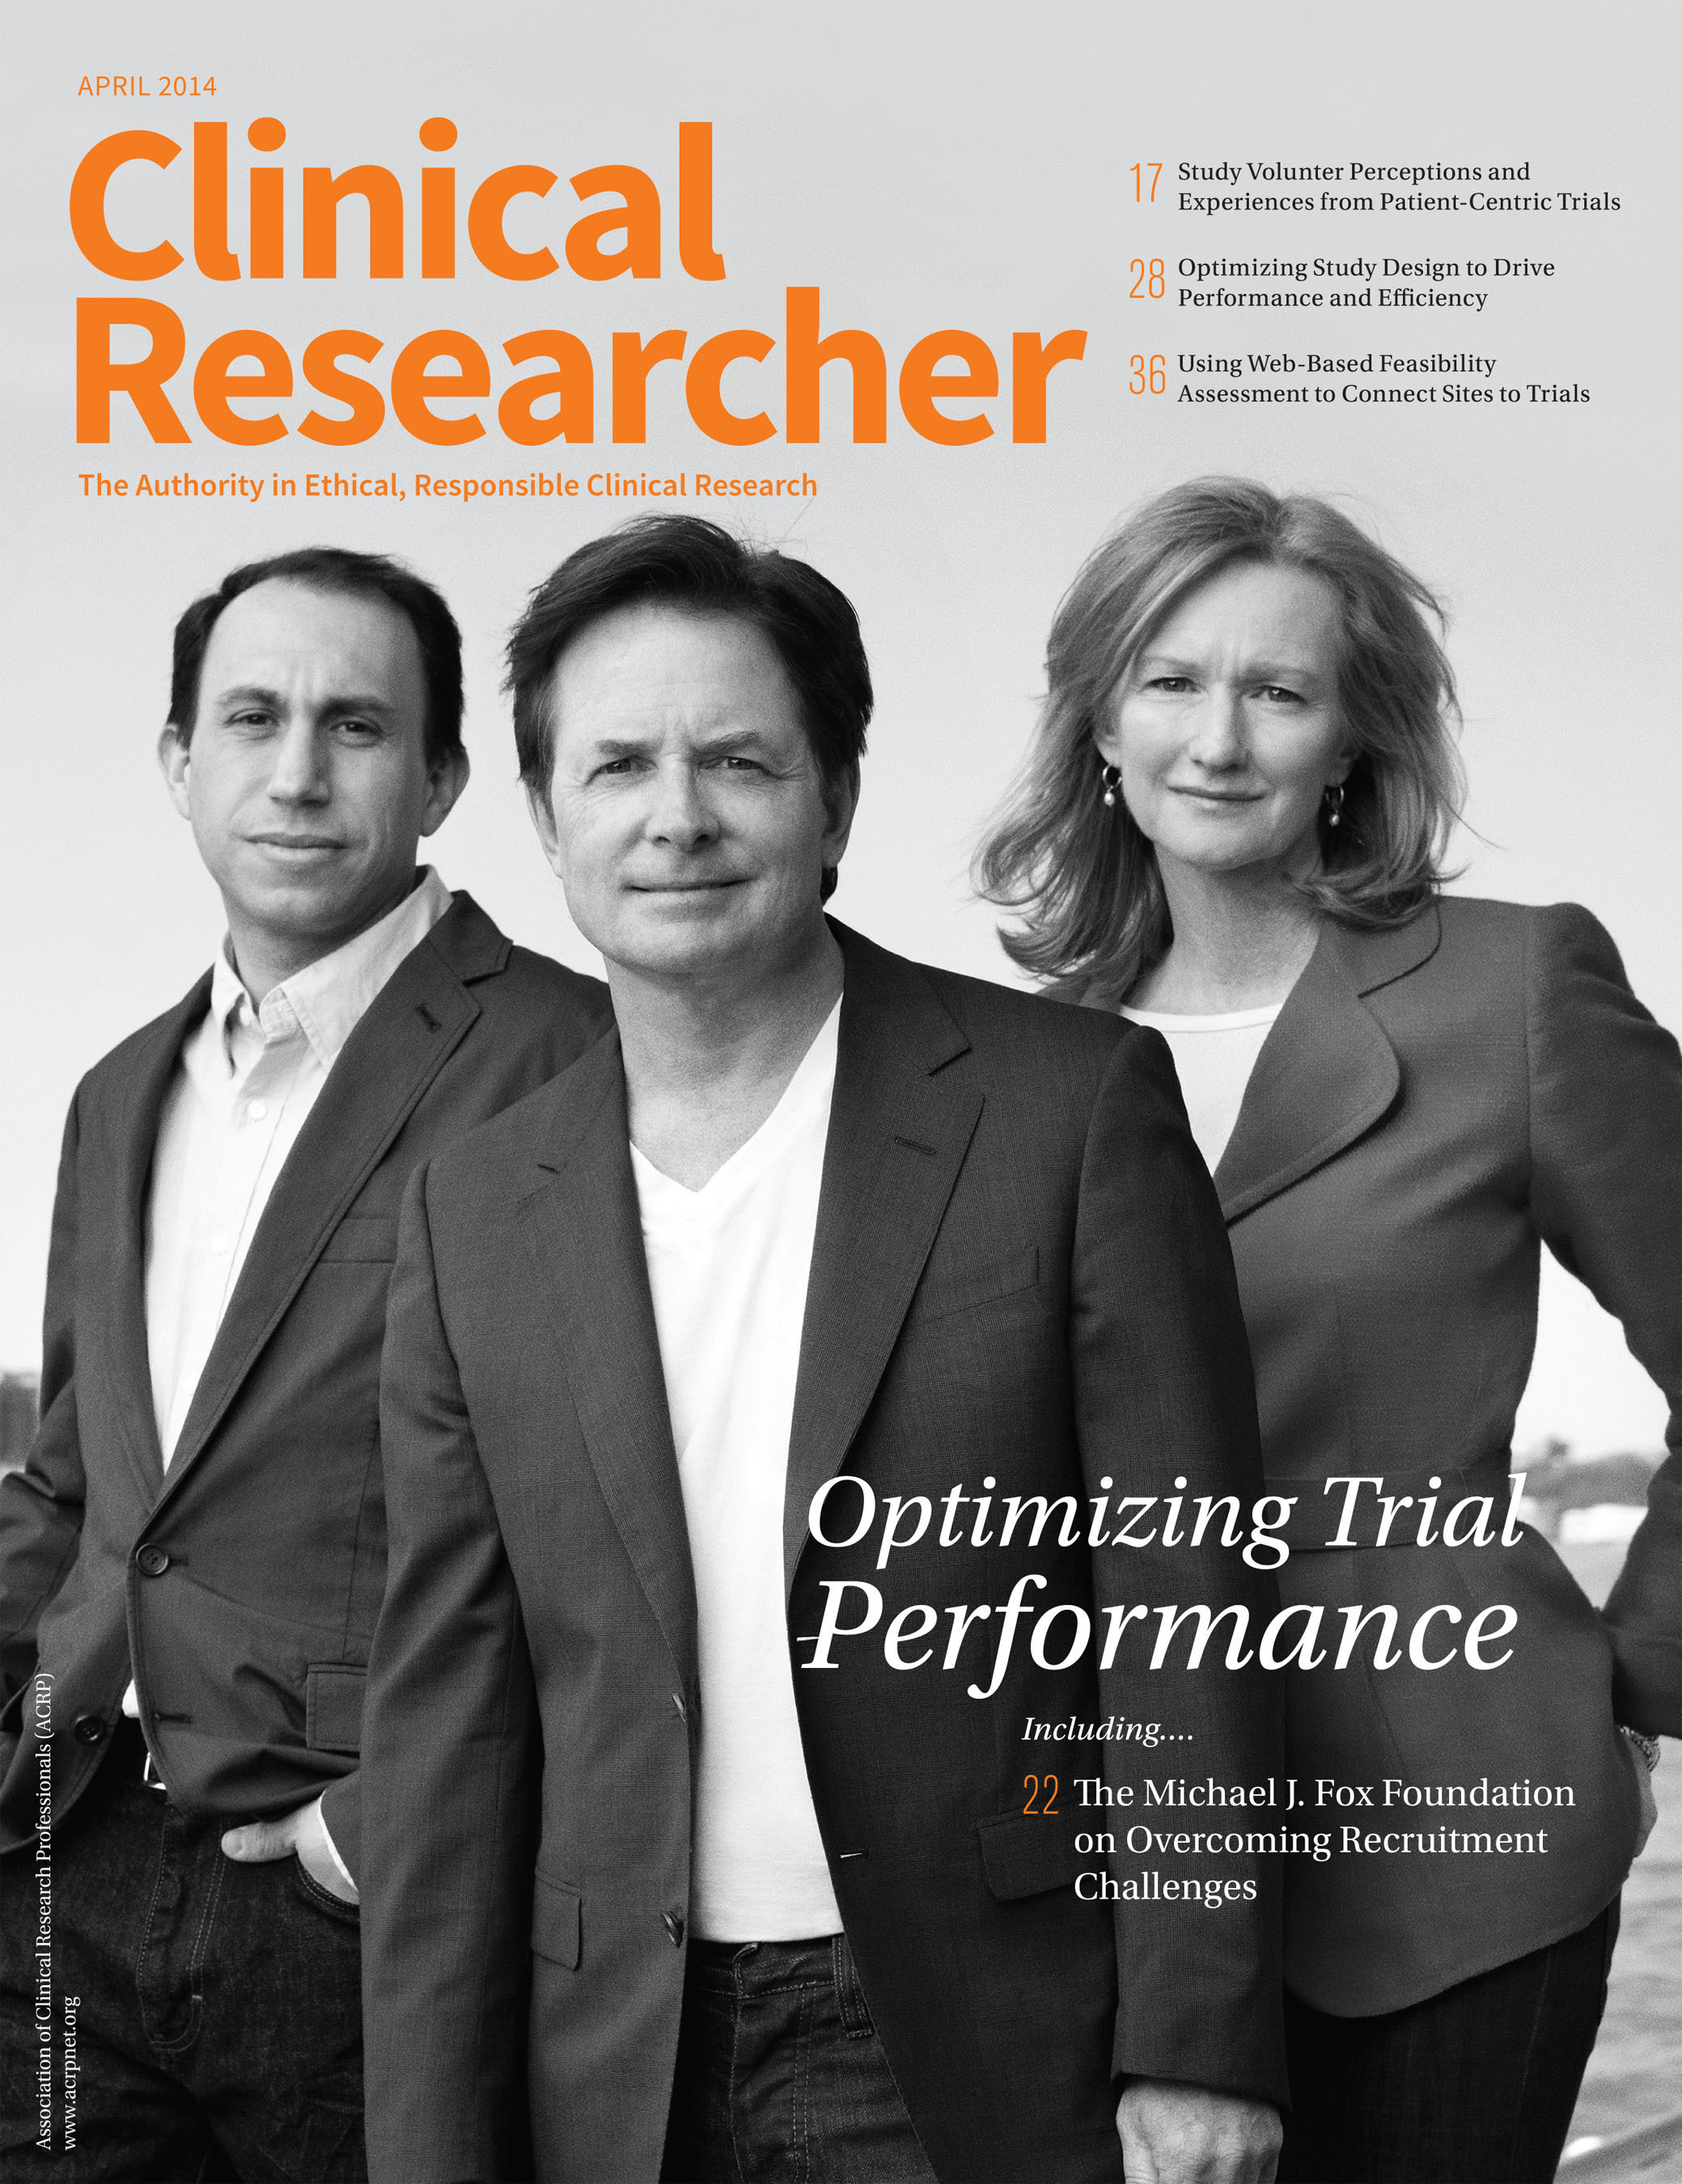 Founder Michael J. Fox; CEO Todd Sherer, PhD; and Co-Founder and Executive Vice Chairman Deborah W. Brooks of The Michael J. Fox Foundation for Parkinson's Research (MJFF) are featured on the cover of the inaugural issue of Clinical Researcher, the journal of the Association of Clinical Research Professionals. (PRNewsFoto/The Michael J. Fox Foundation)